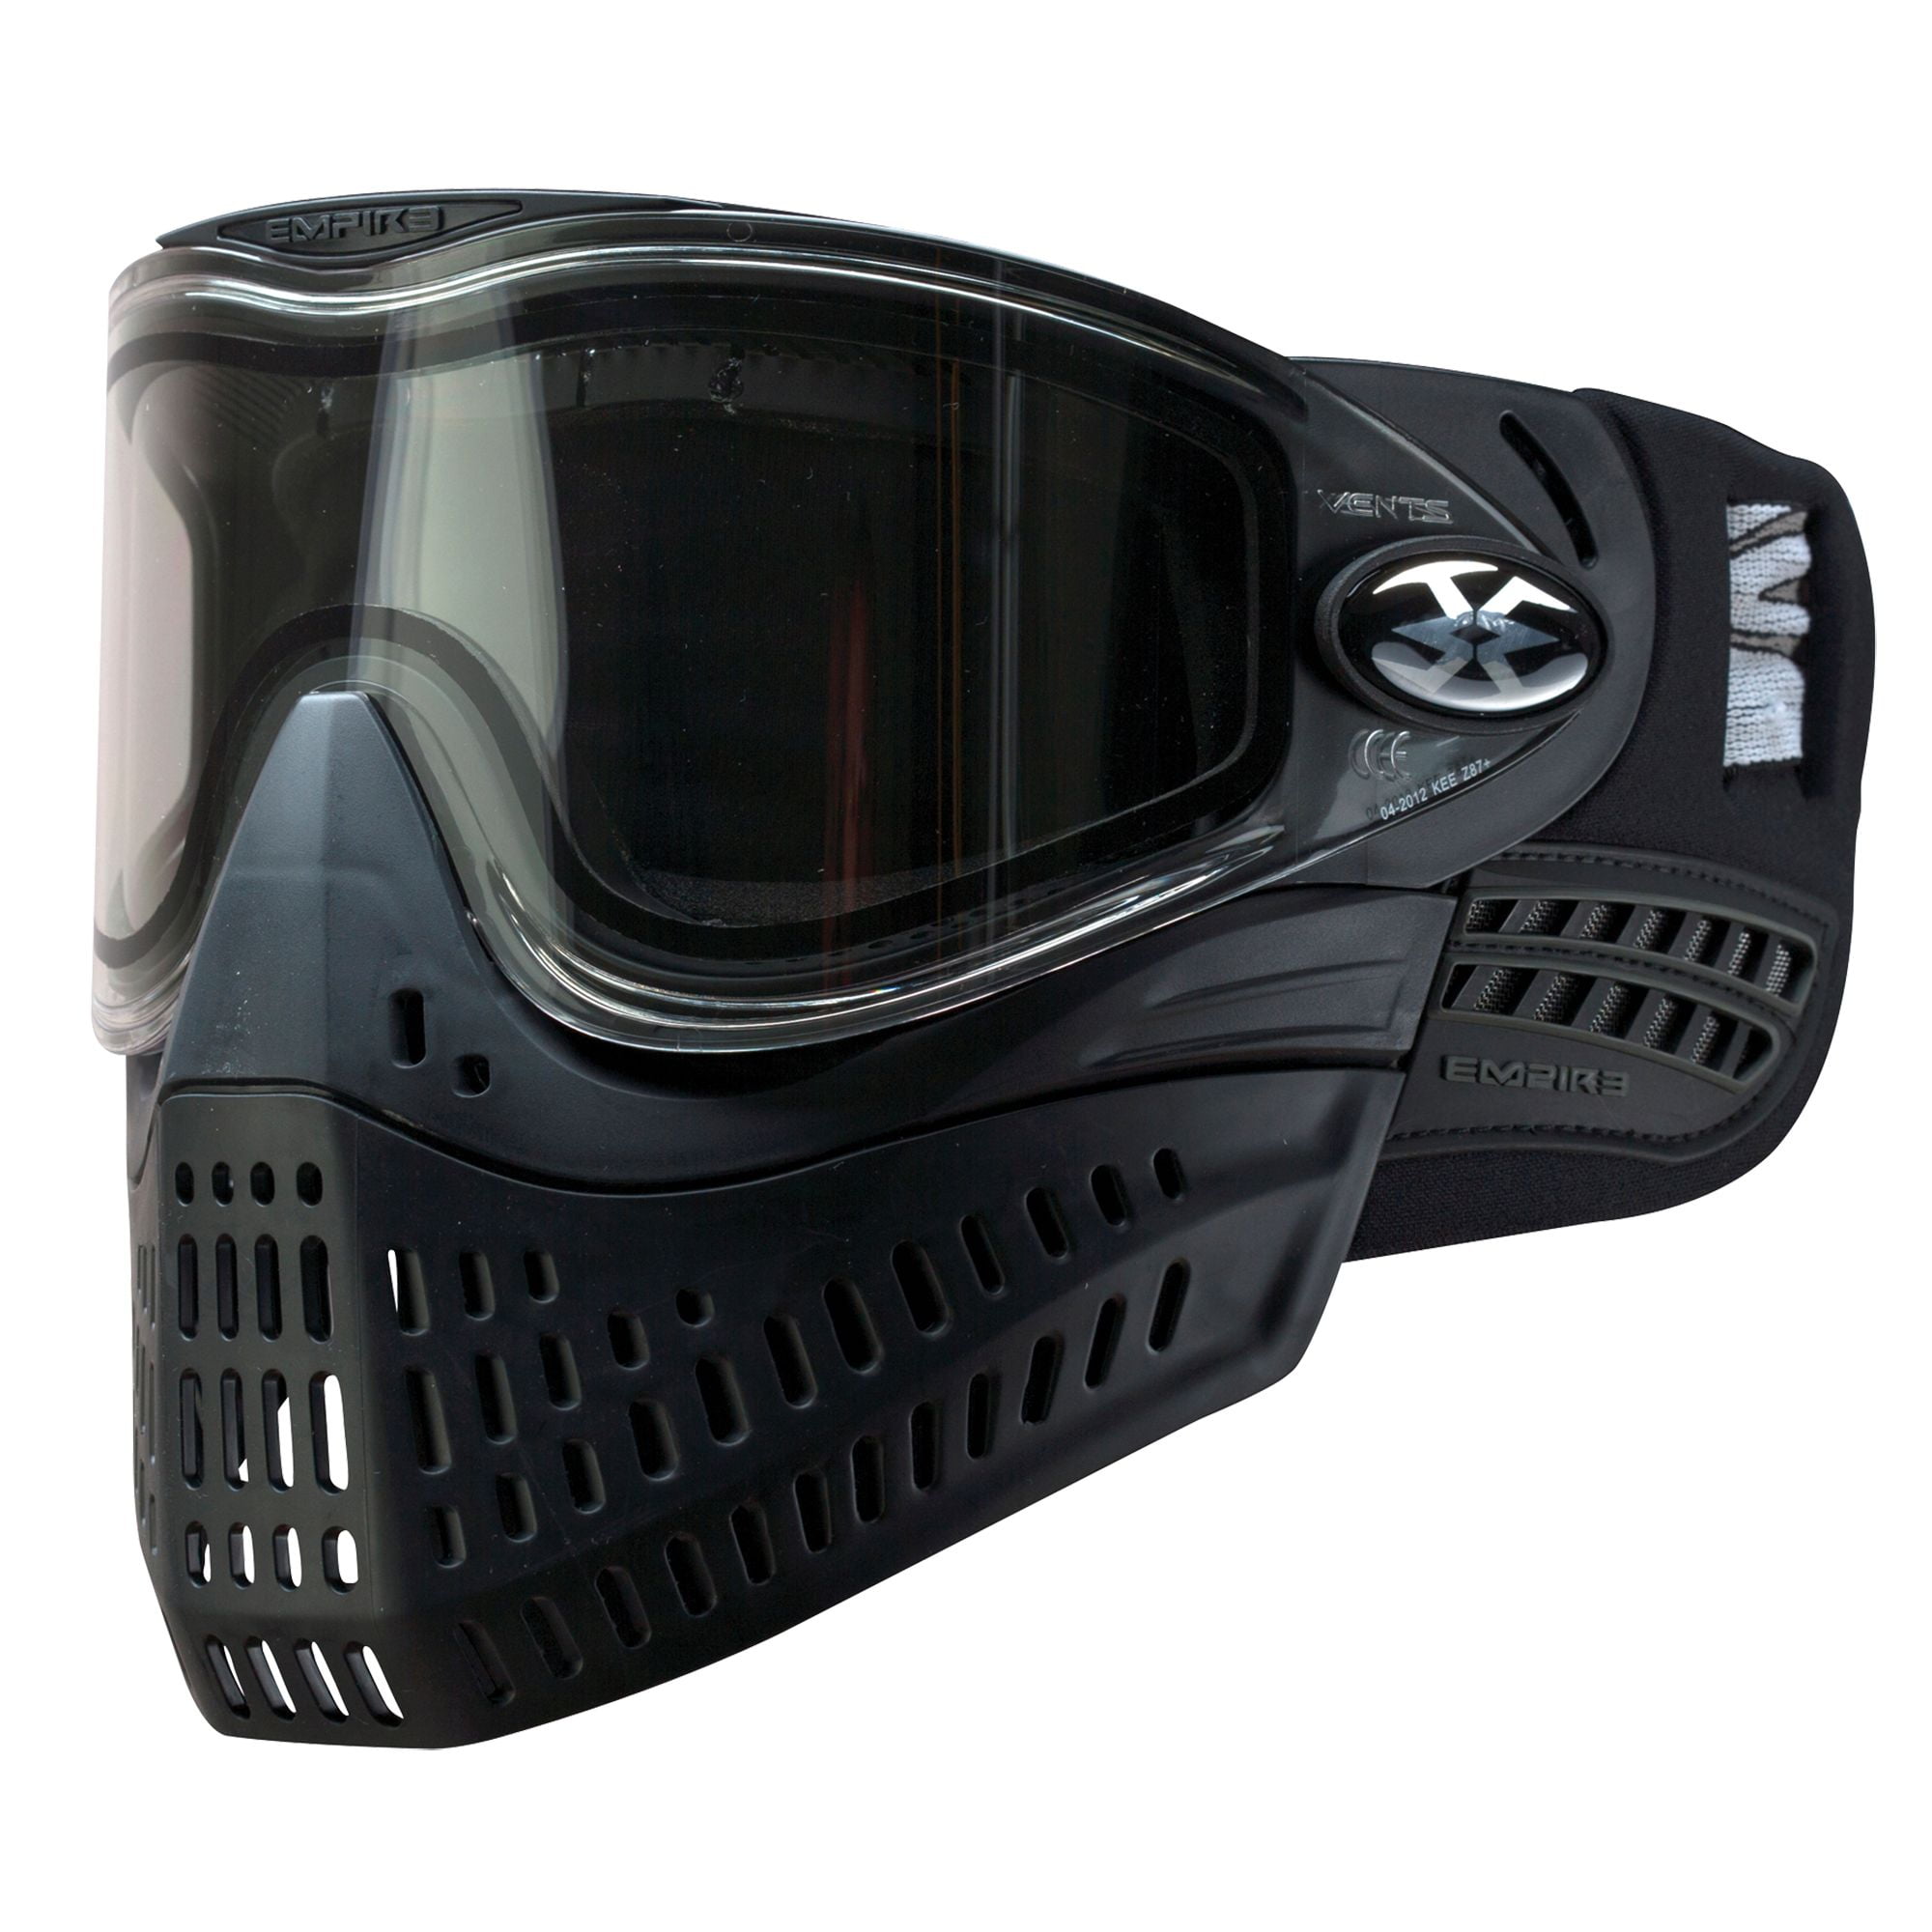 Thermal Smoke C3 for sale online Tippmann Empire E-mesh Airsoft Goggle Black 